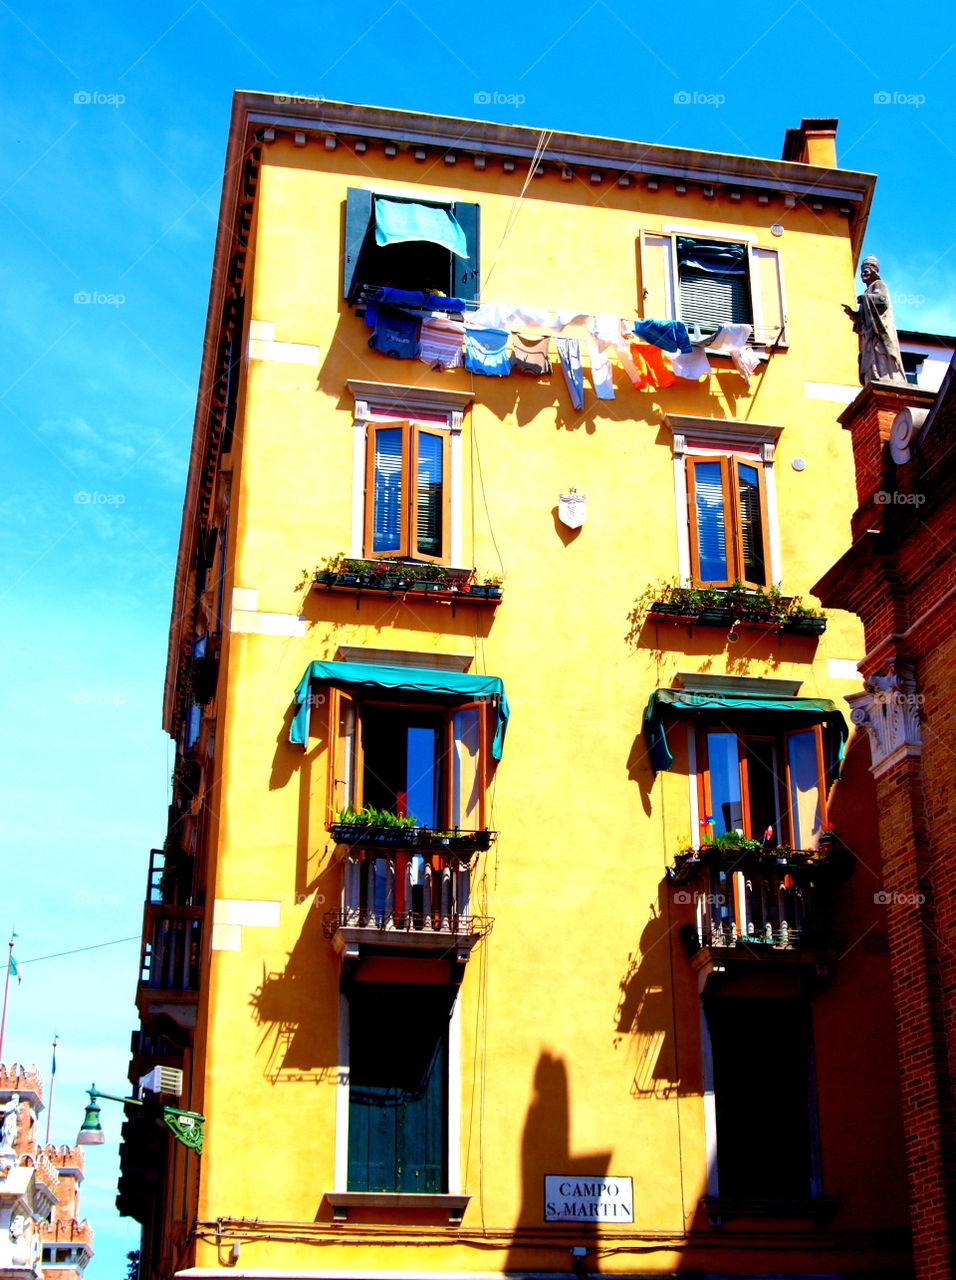 laundry drying outside of a Italian yellow house